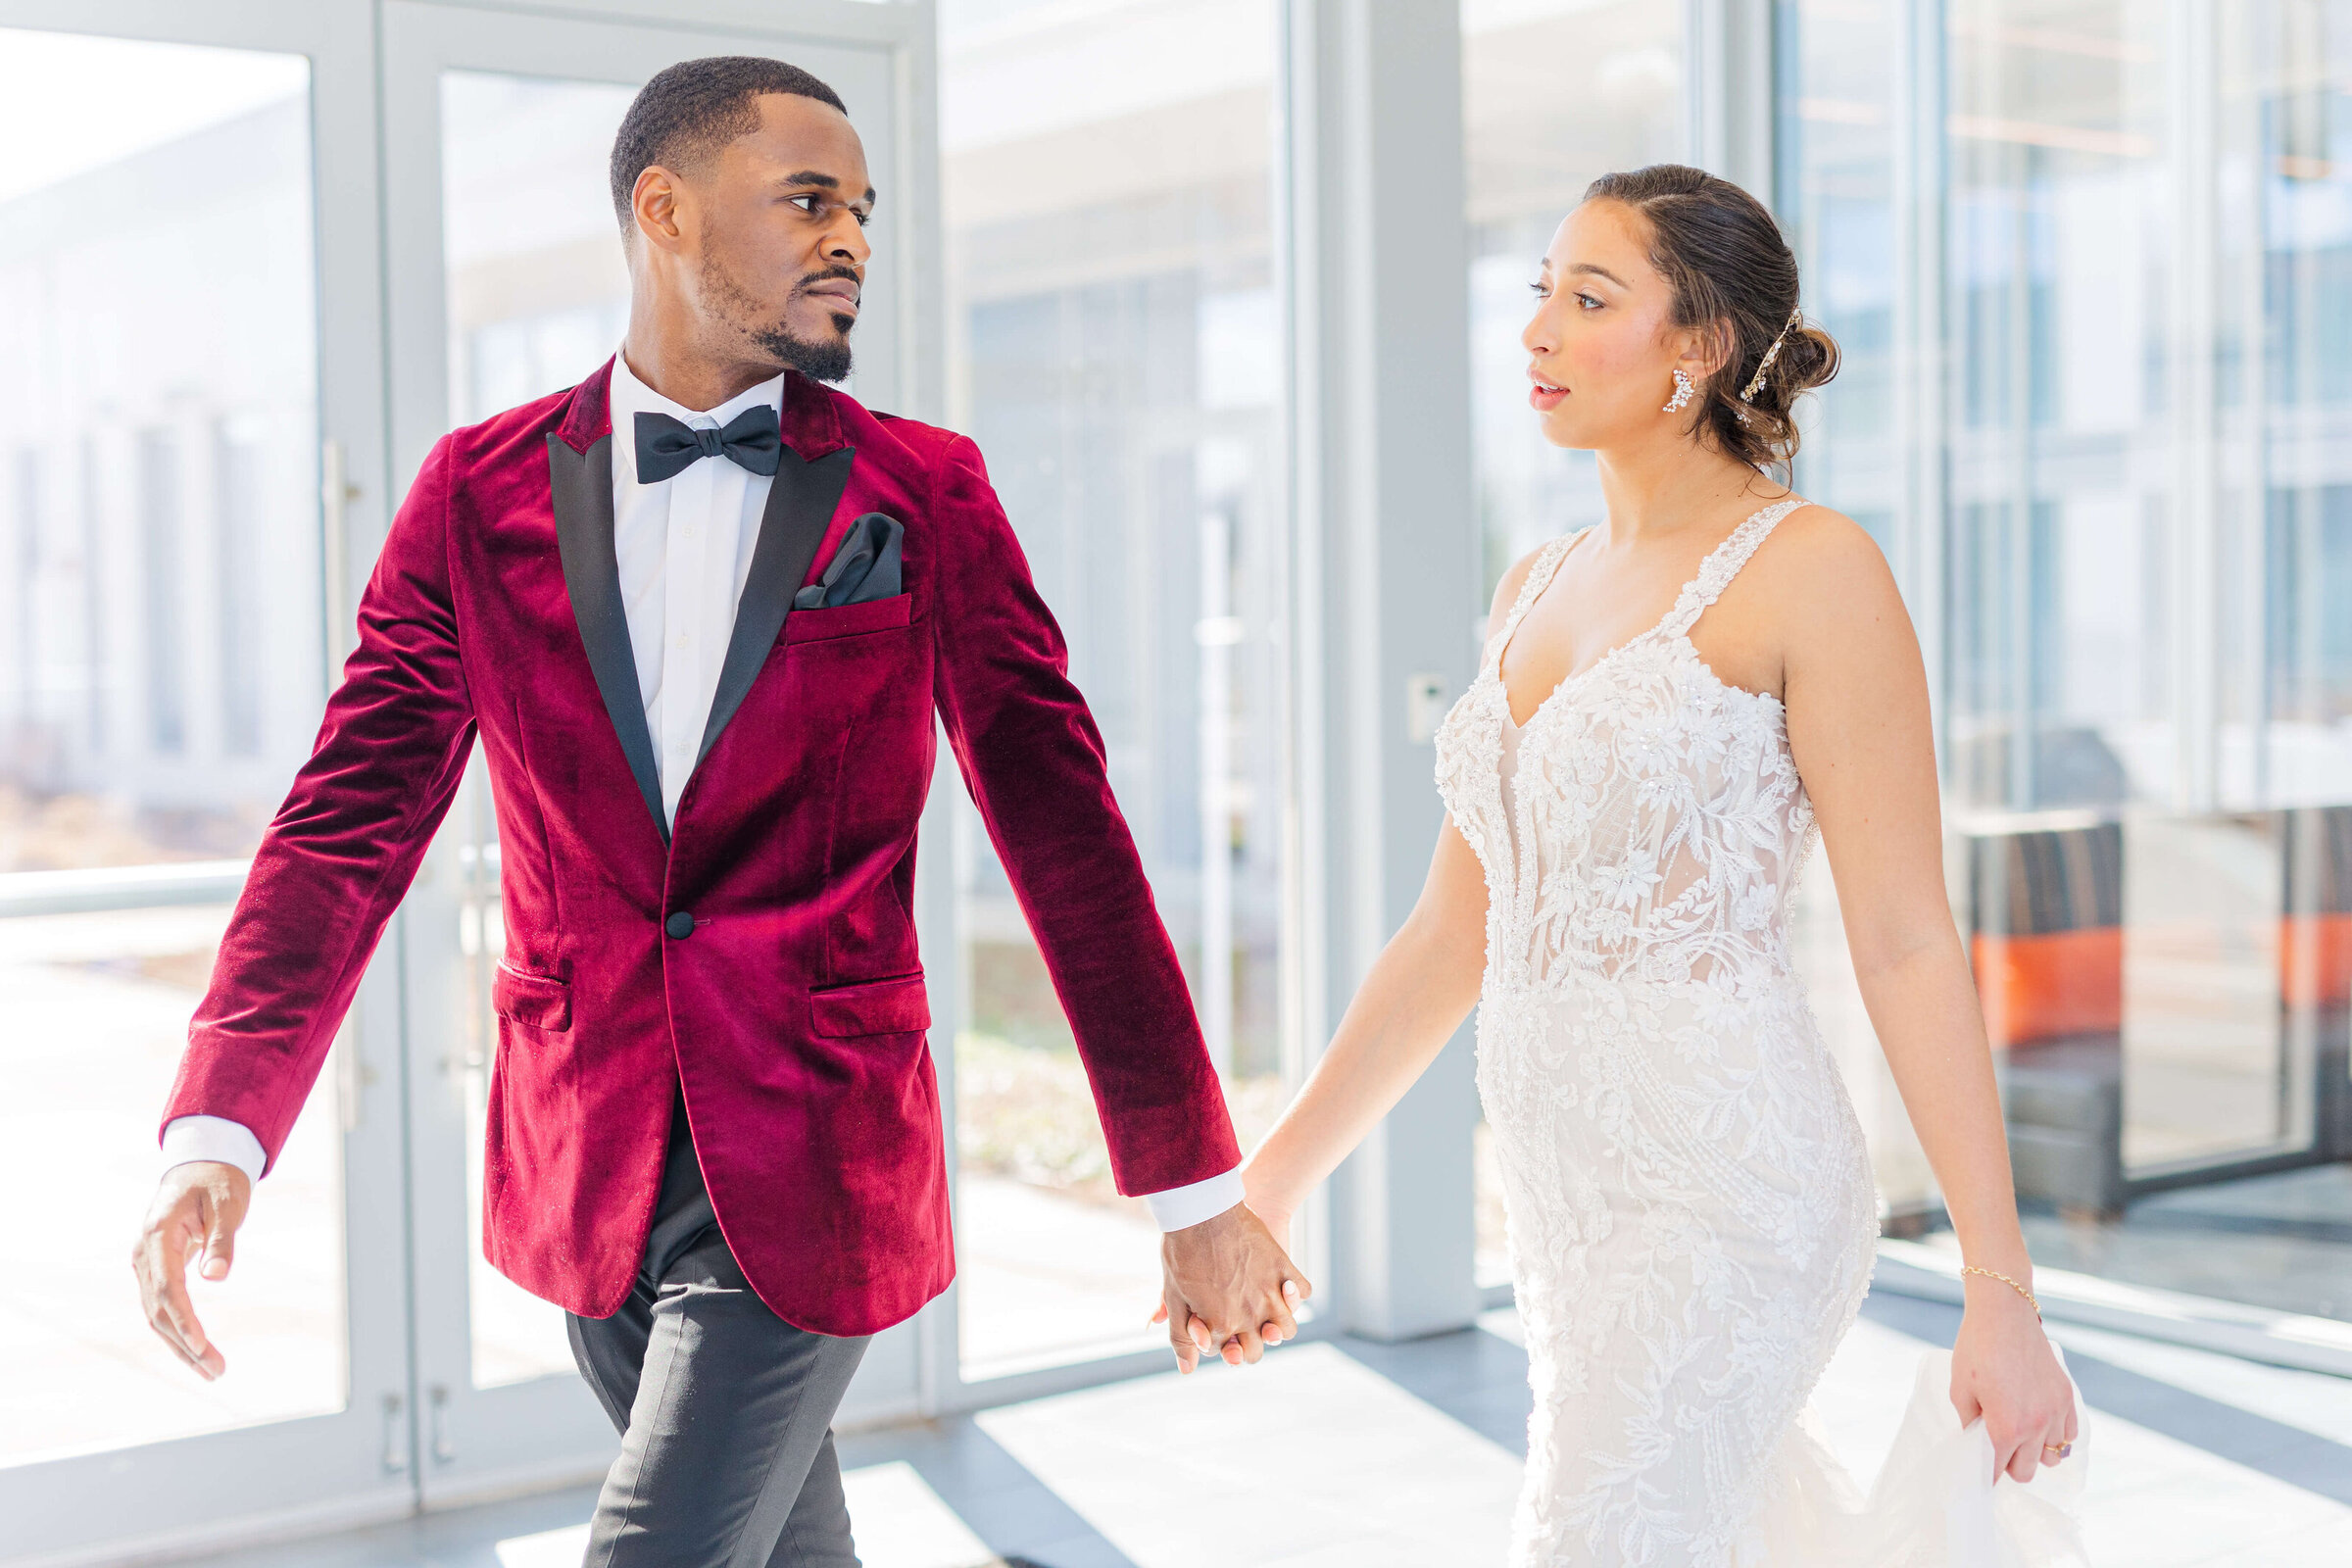 A groom in a maroon jacket holds his bride's hand and guides her as they walk through a hotel with a lot of windows. they are gazing at each other.